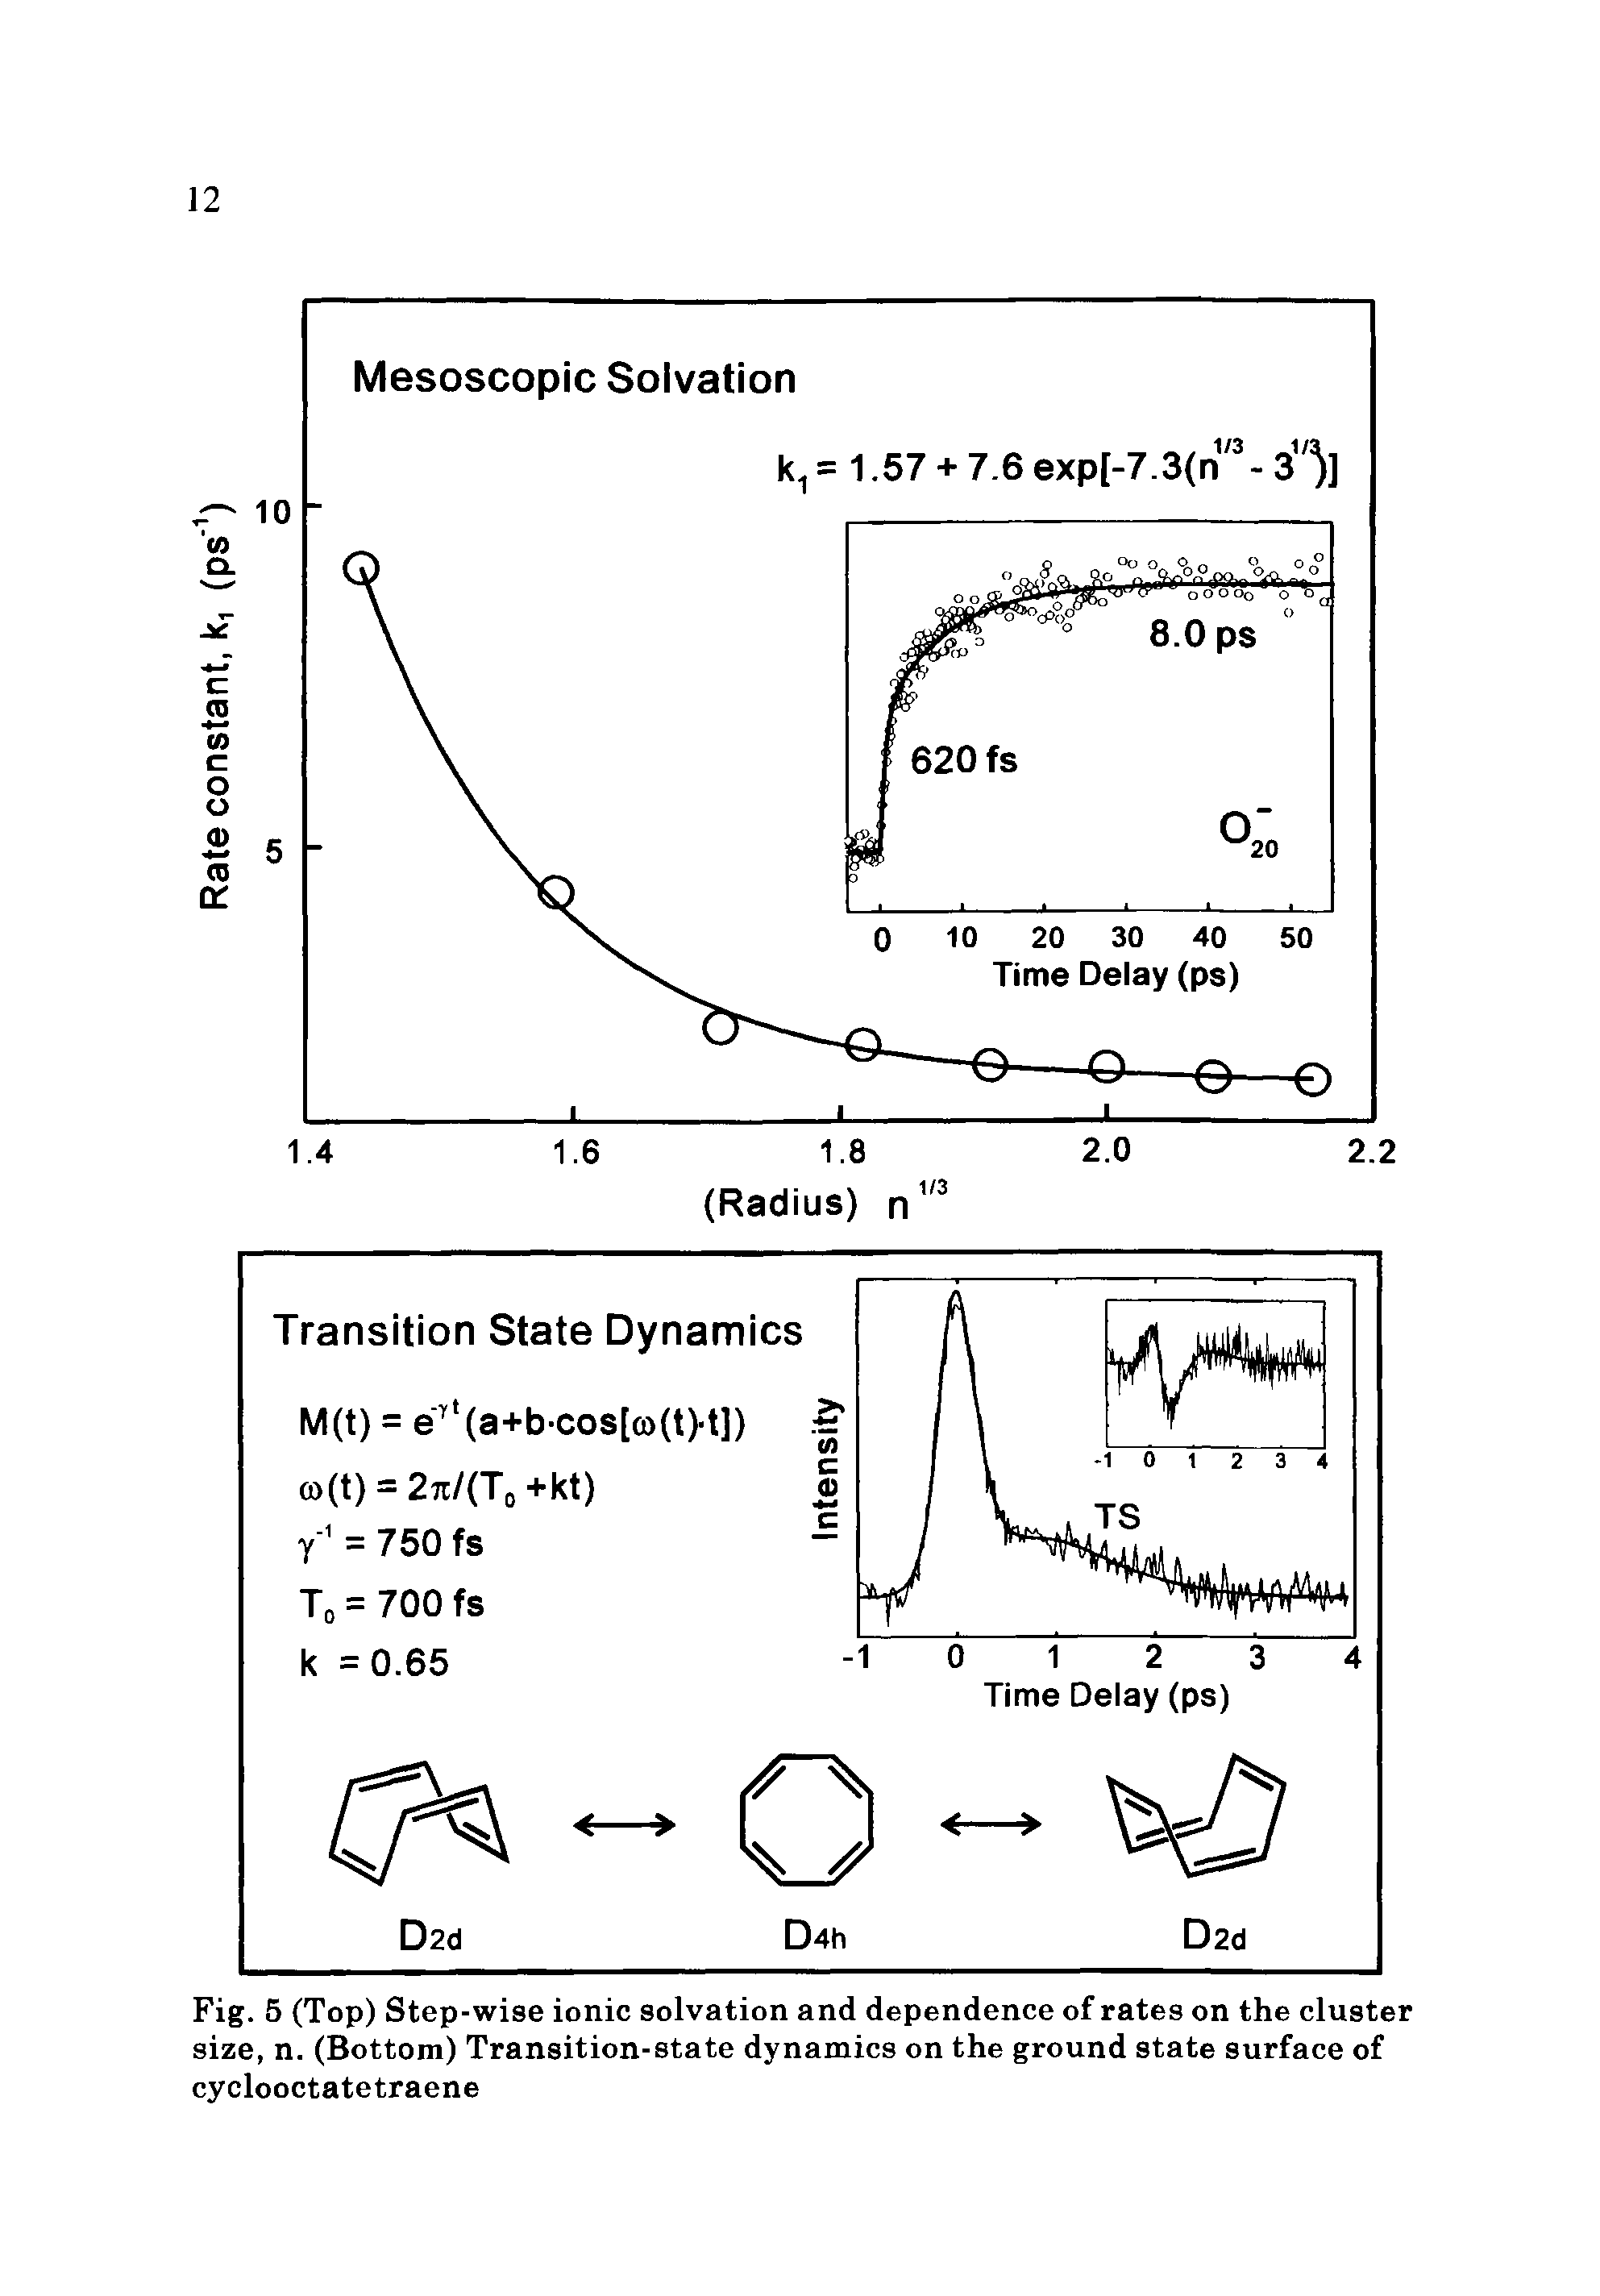 Fig. 5 (Top) Step-wise ionic solvation and dependence of rates on the cluster size, n. (Bottom) Transition-state dynamics on the ground state surface of cyclooctatetraene...